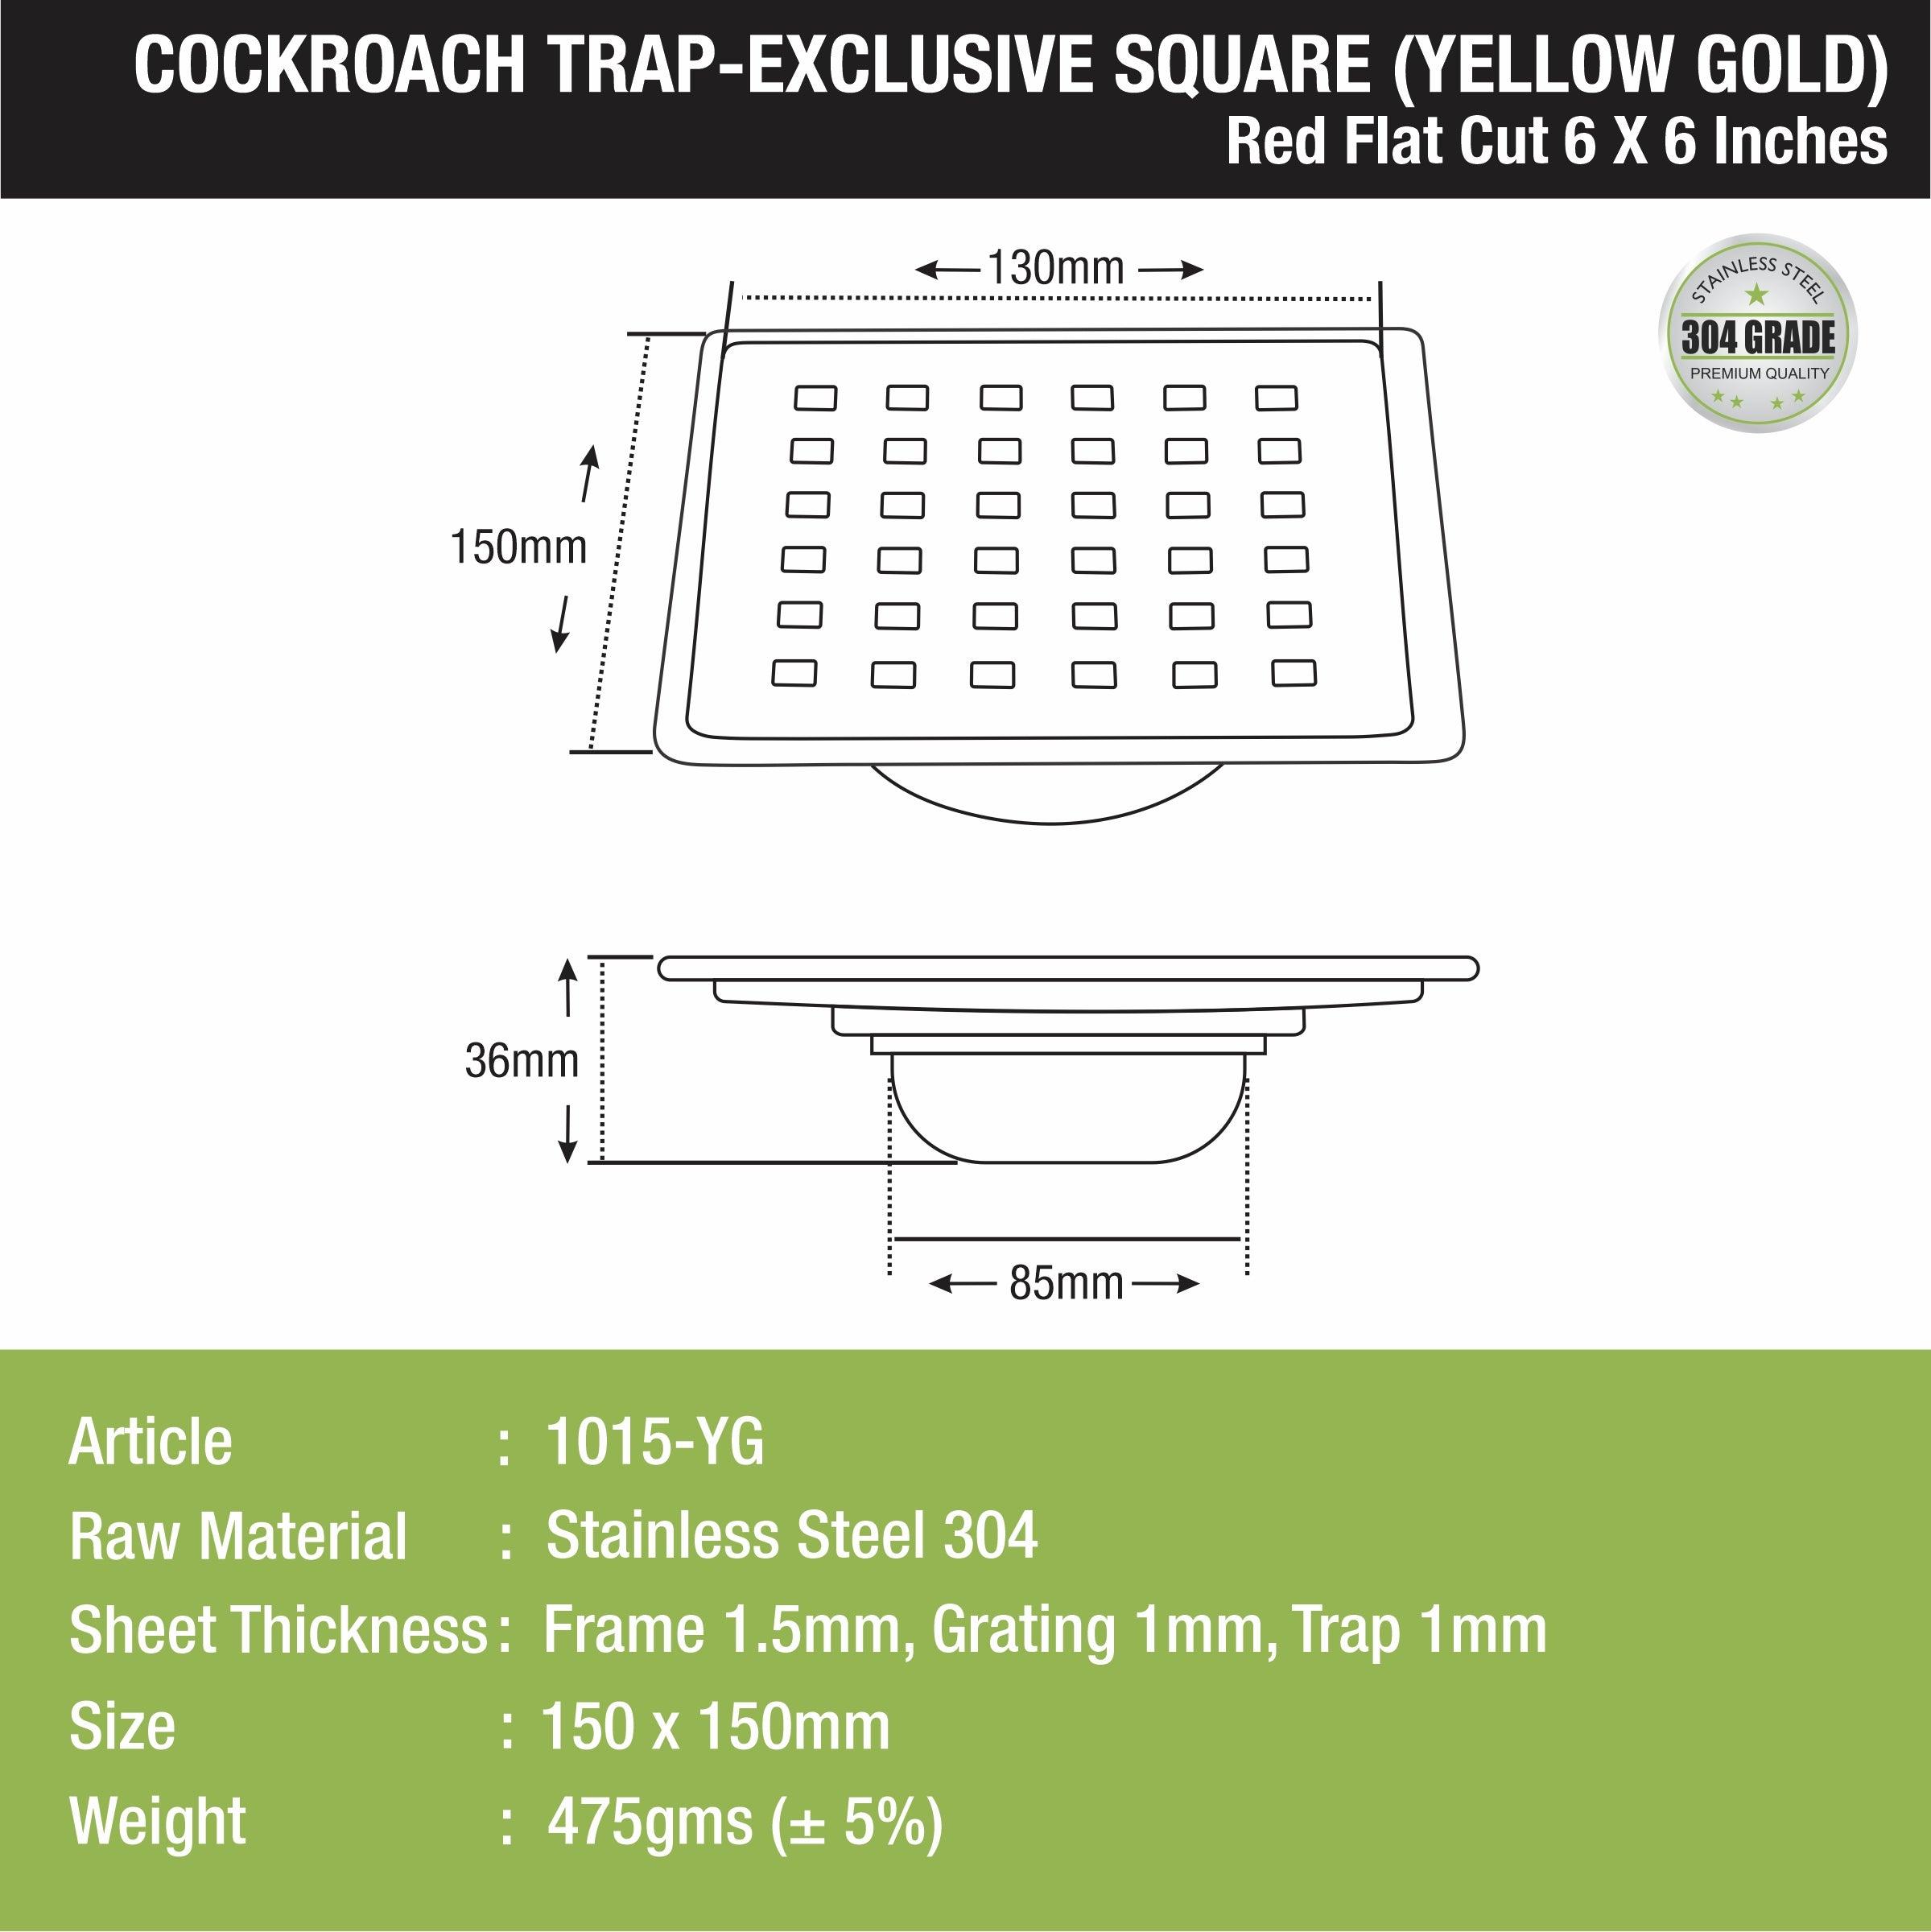 Red Exclusive Square Flat Cut Floor Drain in Yellow Gold PVD Coating (6 x 6 Inches) with Cockroach Trap - LIPKA - Lipka Home